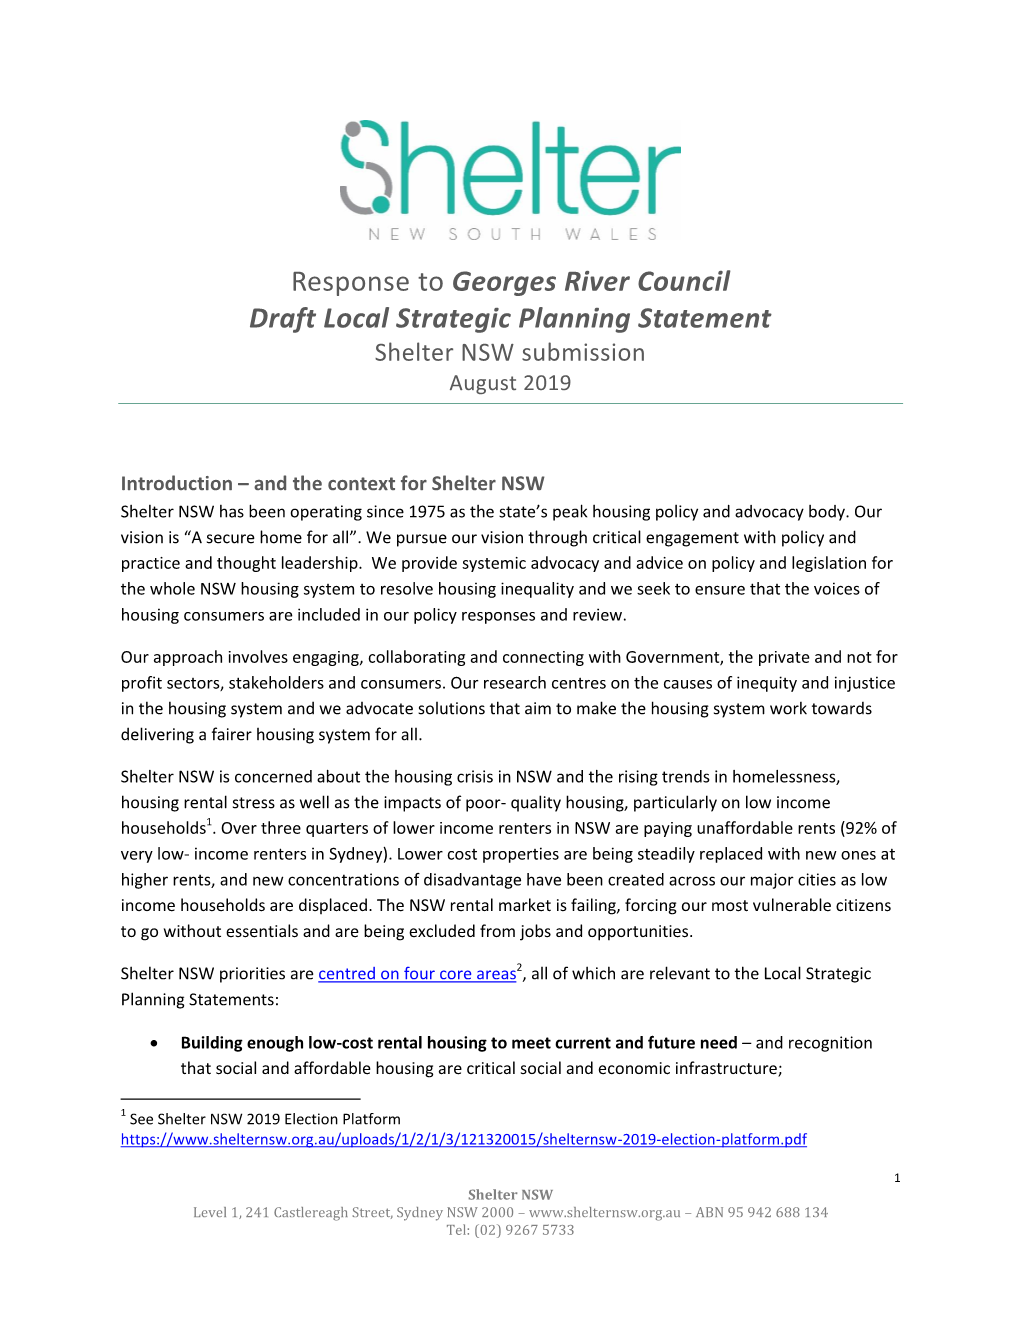 Response to Georges River Council Draft Local Strategic Planning Statement Shelter NSW Submission August 2019